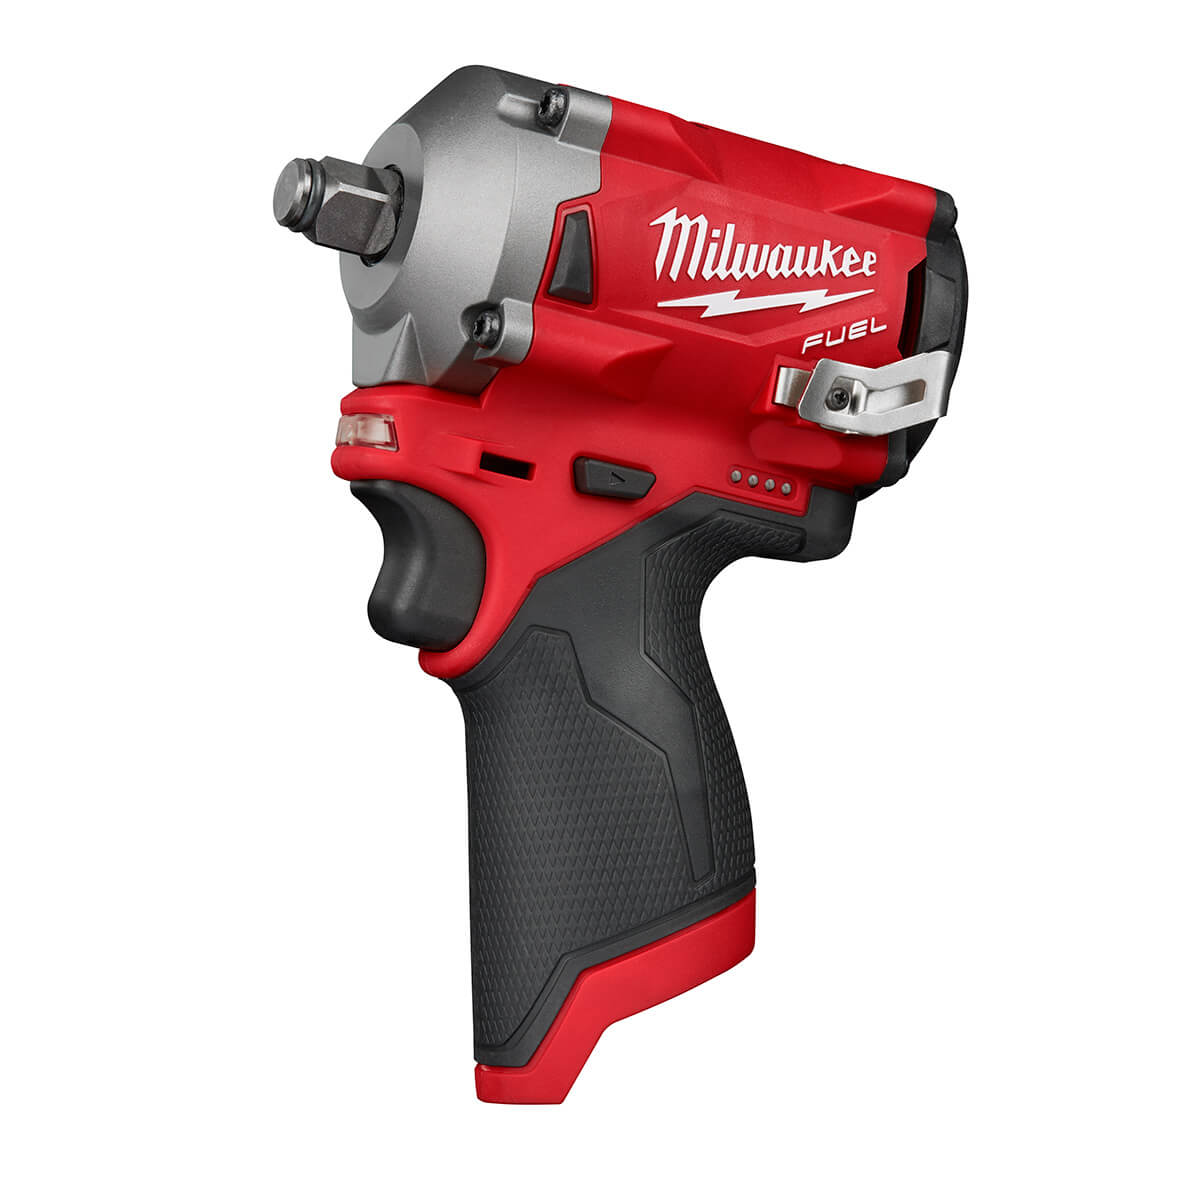 Milwaukee 2555-20 - M12 FUEL Stubby 1/2" Impact Wrench - wise-line-tools